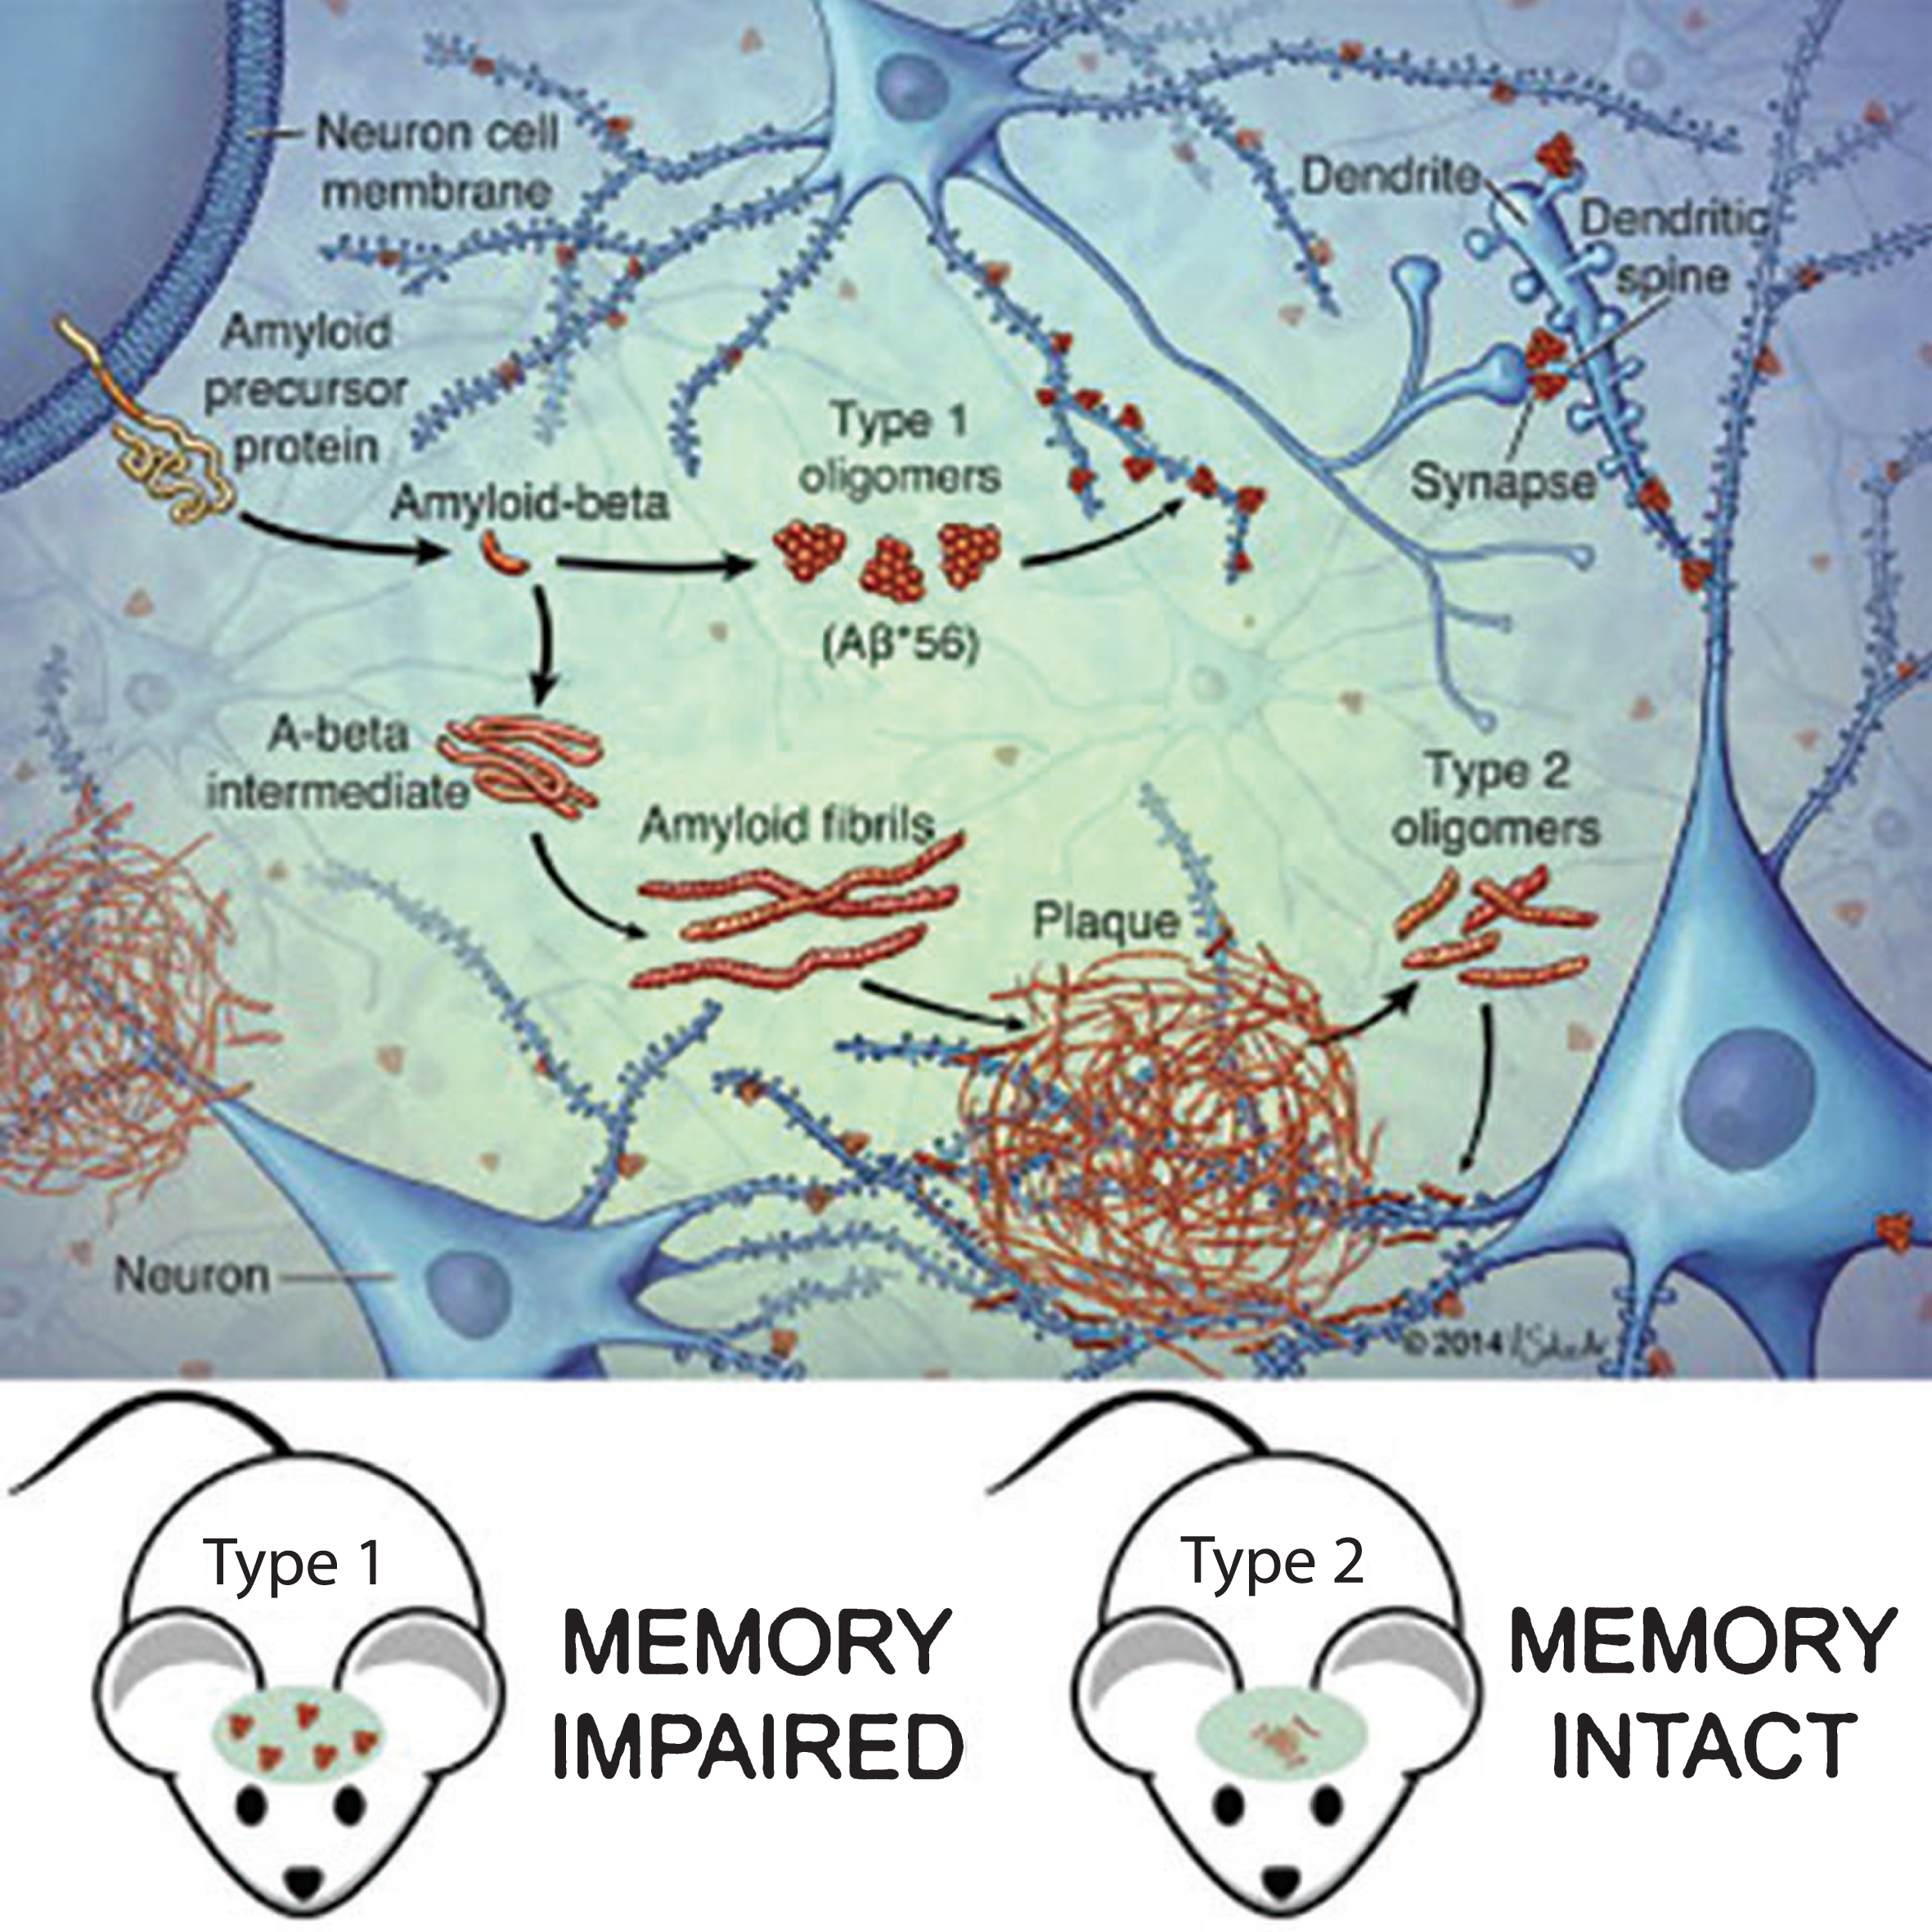 AβOs can be divided into two classes based on their temporal, spatial, and structural relationships to amyloid plaques as well as their ability to cause memory dysfunction. Type 1 AβOs (aka “peak 1” or HMW) are thought to be associated with memory impairment, while type 2 AβOs (aka “peak 2” or LMW) are not. Only type 2 AβOs are associated with amyloid plaques. Reprinted from “Quaternary Structure Defines a Large Class of Amyloid-beta Oligomers Neutralized by Sequestration” by Liu P, Reed MN, Kotilinek LA, Grant MK, Forster CL, Qiang W, Shapiro SL, Reichl JH, Chiang AC, Jankowsky JL, Wilmot CM, Cleary JP, Zahs KR, and Ashe KH. This was published in Cell Rep, 2015, 11(11): 1760-1771, under the terms of the Creative Commons Attribution Non-Commercial No Derivatives License (CC BY NC ND) https://creativecommons.org/licenses/by-nc-nd/4.0/ [119].